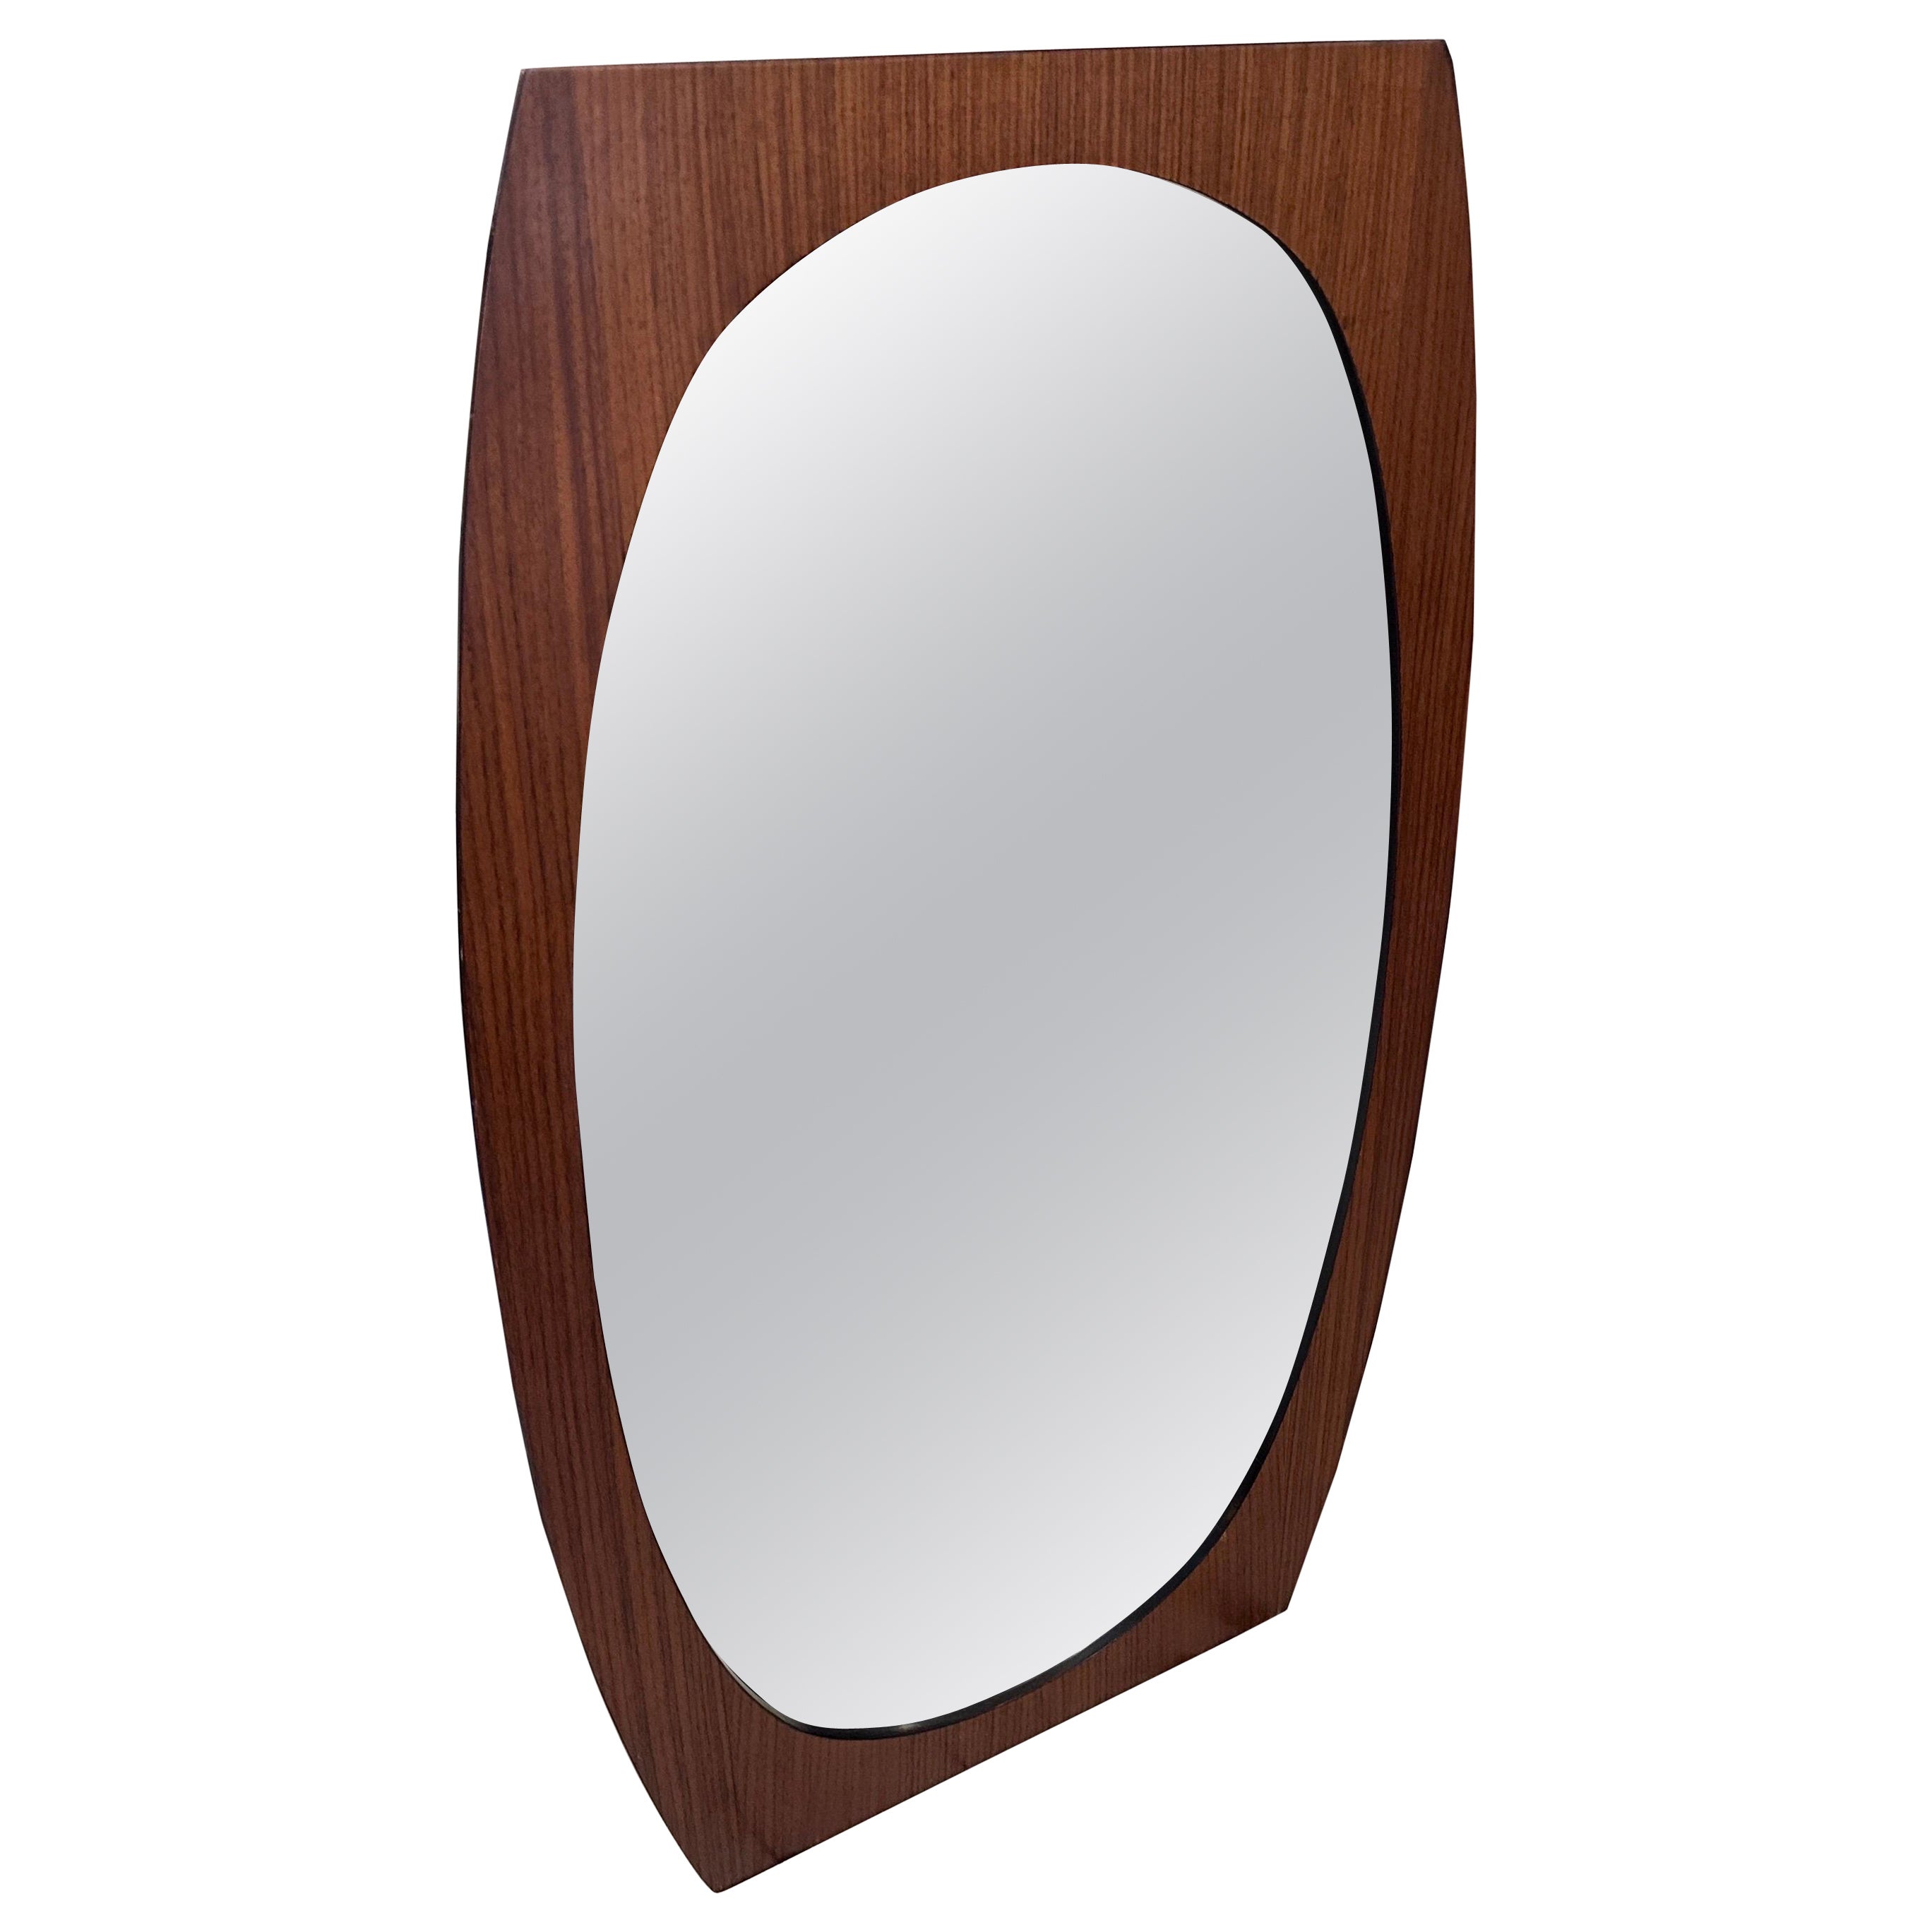 An Iconic 1970s Mid-Century Modern Wood Mirror by Gianfranco Frattini For Sale